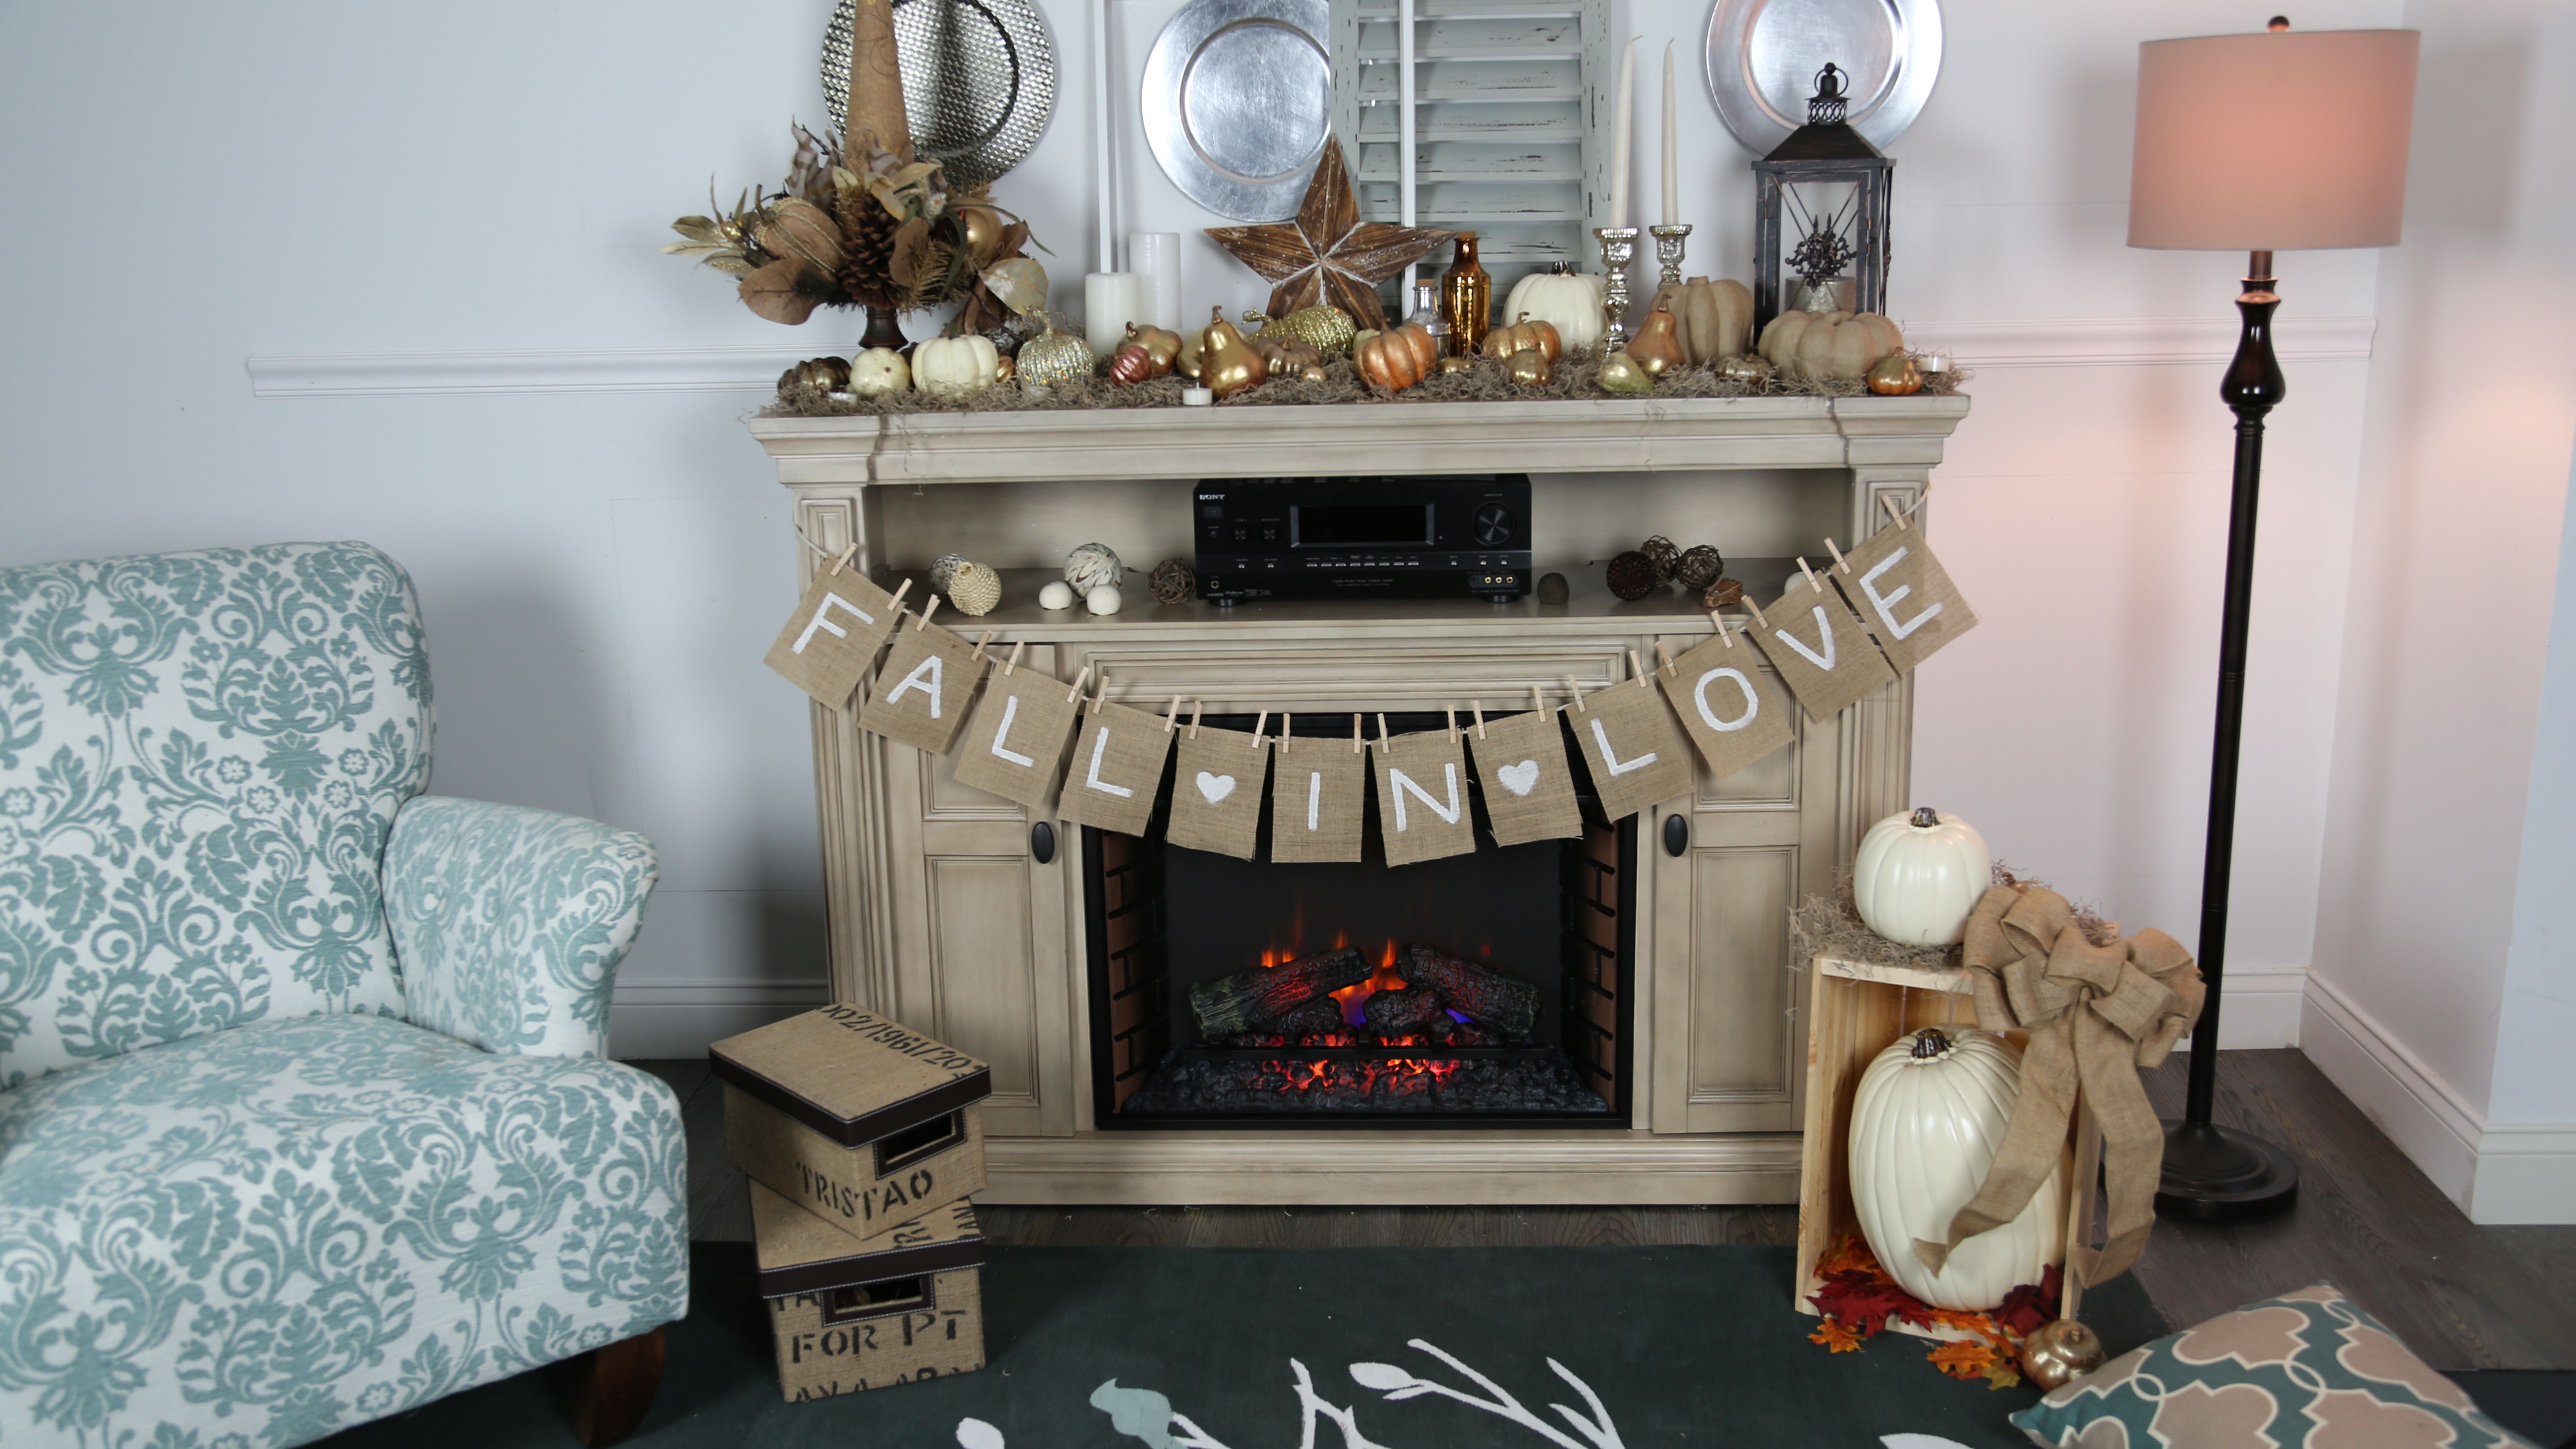 Lowes Fireplace Surround Unique 31 Tips to Diy and Decorate Your Fireplace Mantel Shelf